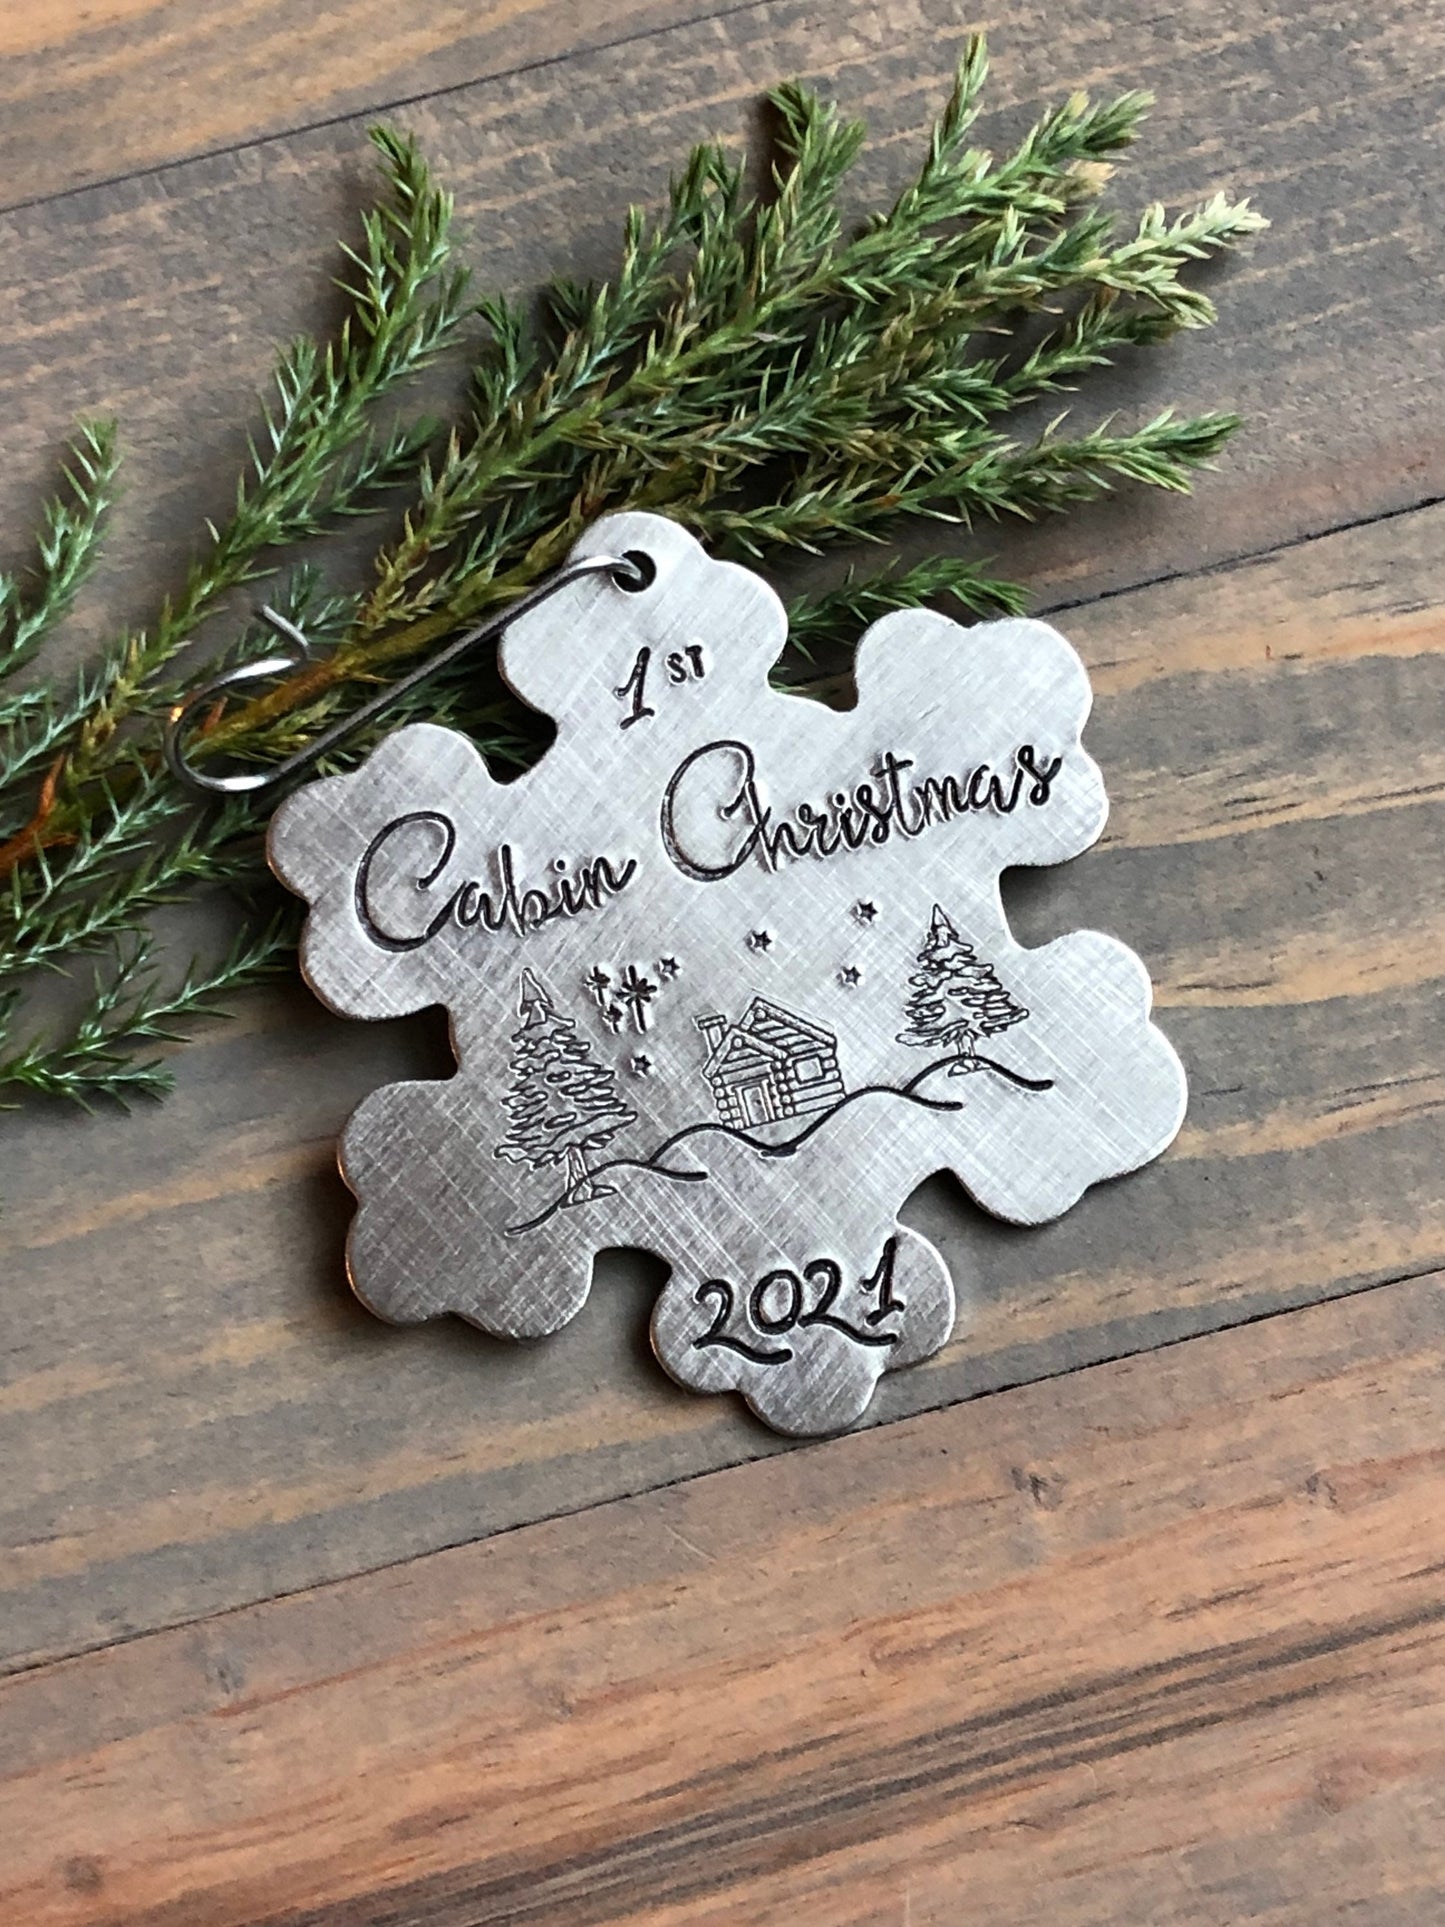 First Cabin Christmas, 1st Cabin Christmas, Ornament for Second Home, New Home Gift, Cottage Ornament, Christmas Ornament for New Home